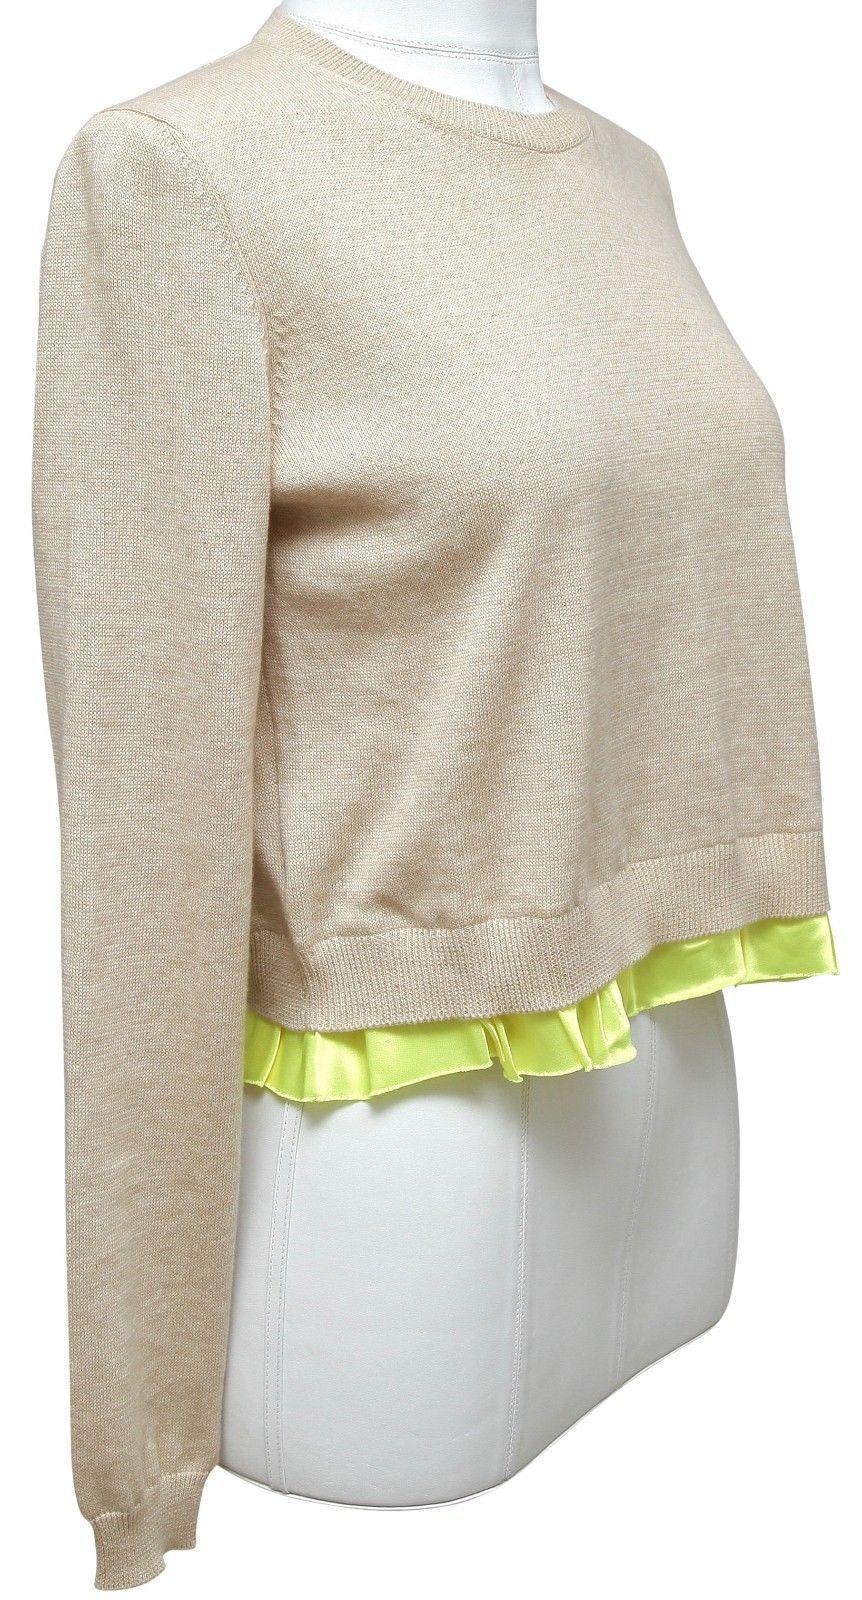 GUARANTEED AUTHENTIC MIU MIU TAN KNIT

Retail excluding tax $515


Details:
• Tan cotton long sleeve crewneck sweater that has a great easy fit.
• Yellow viscose ruffle trim around hem.
• Lightweight.

Material: 100% Cotton; 100% Viscose Trim

Size: